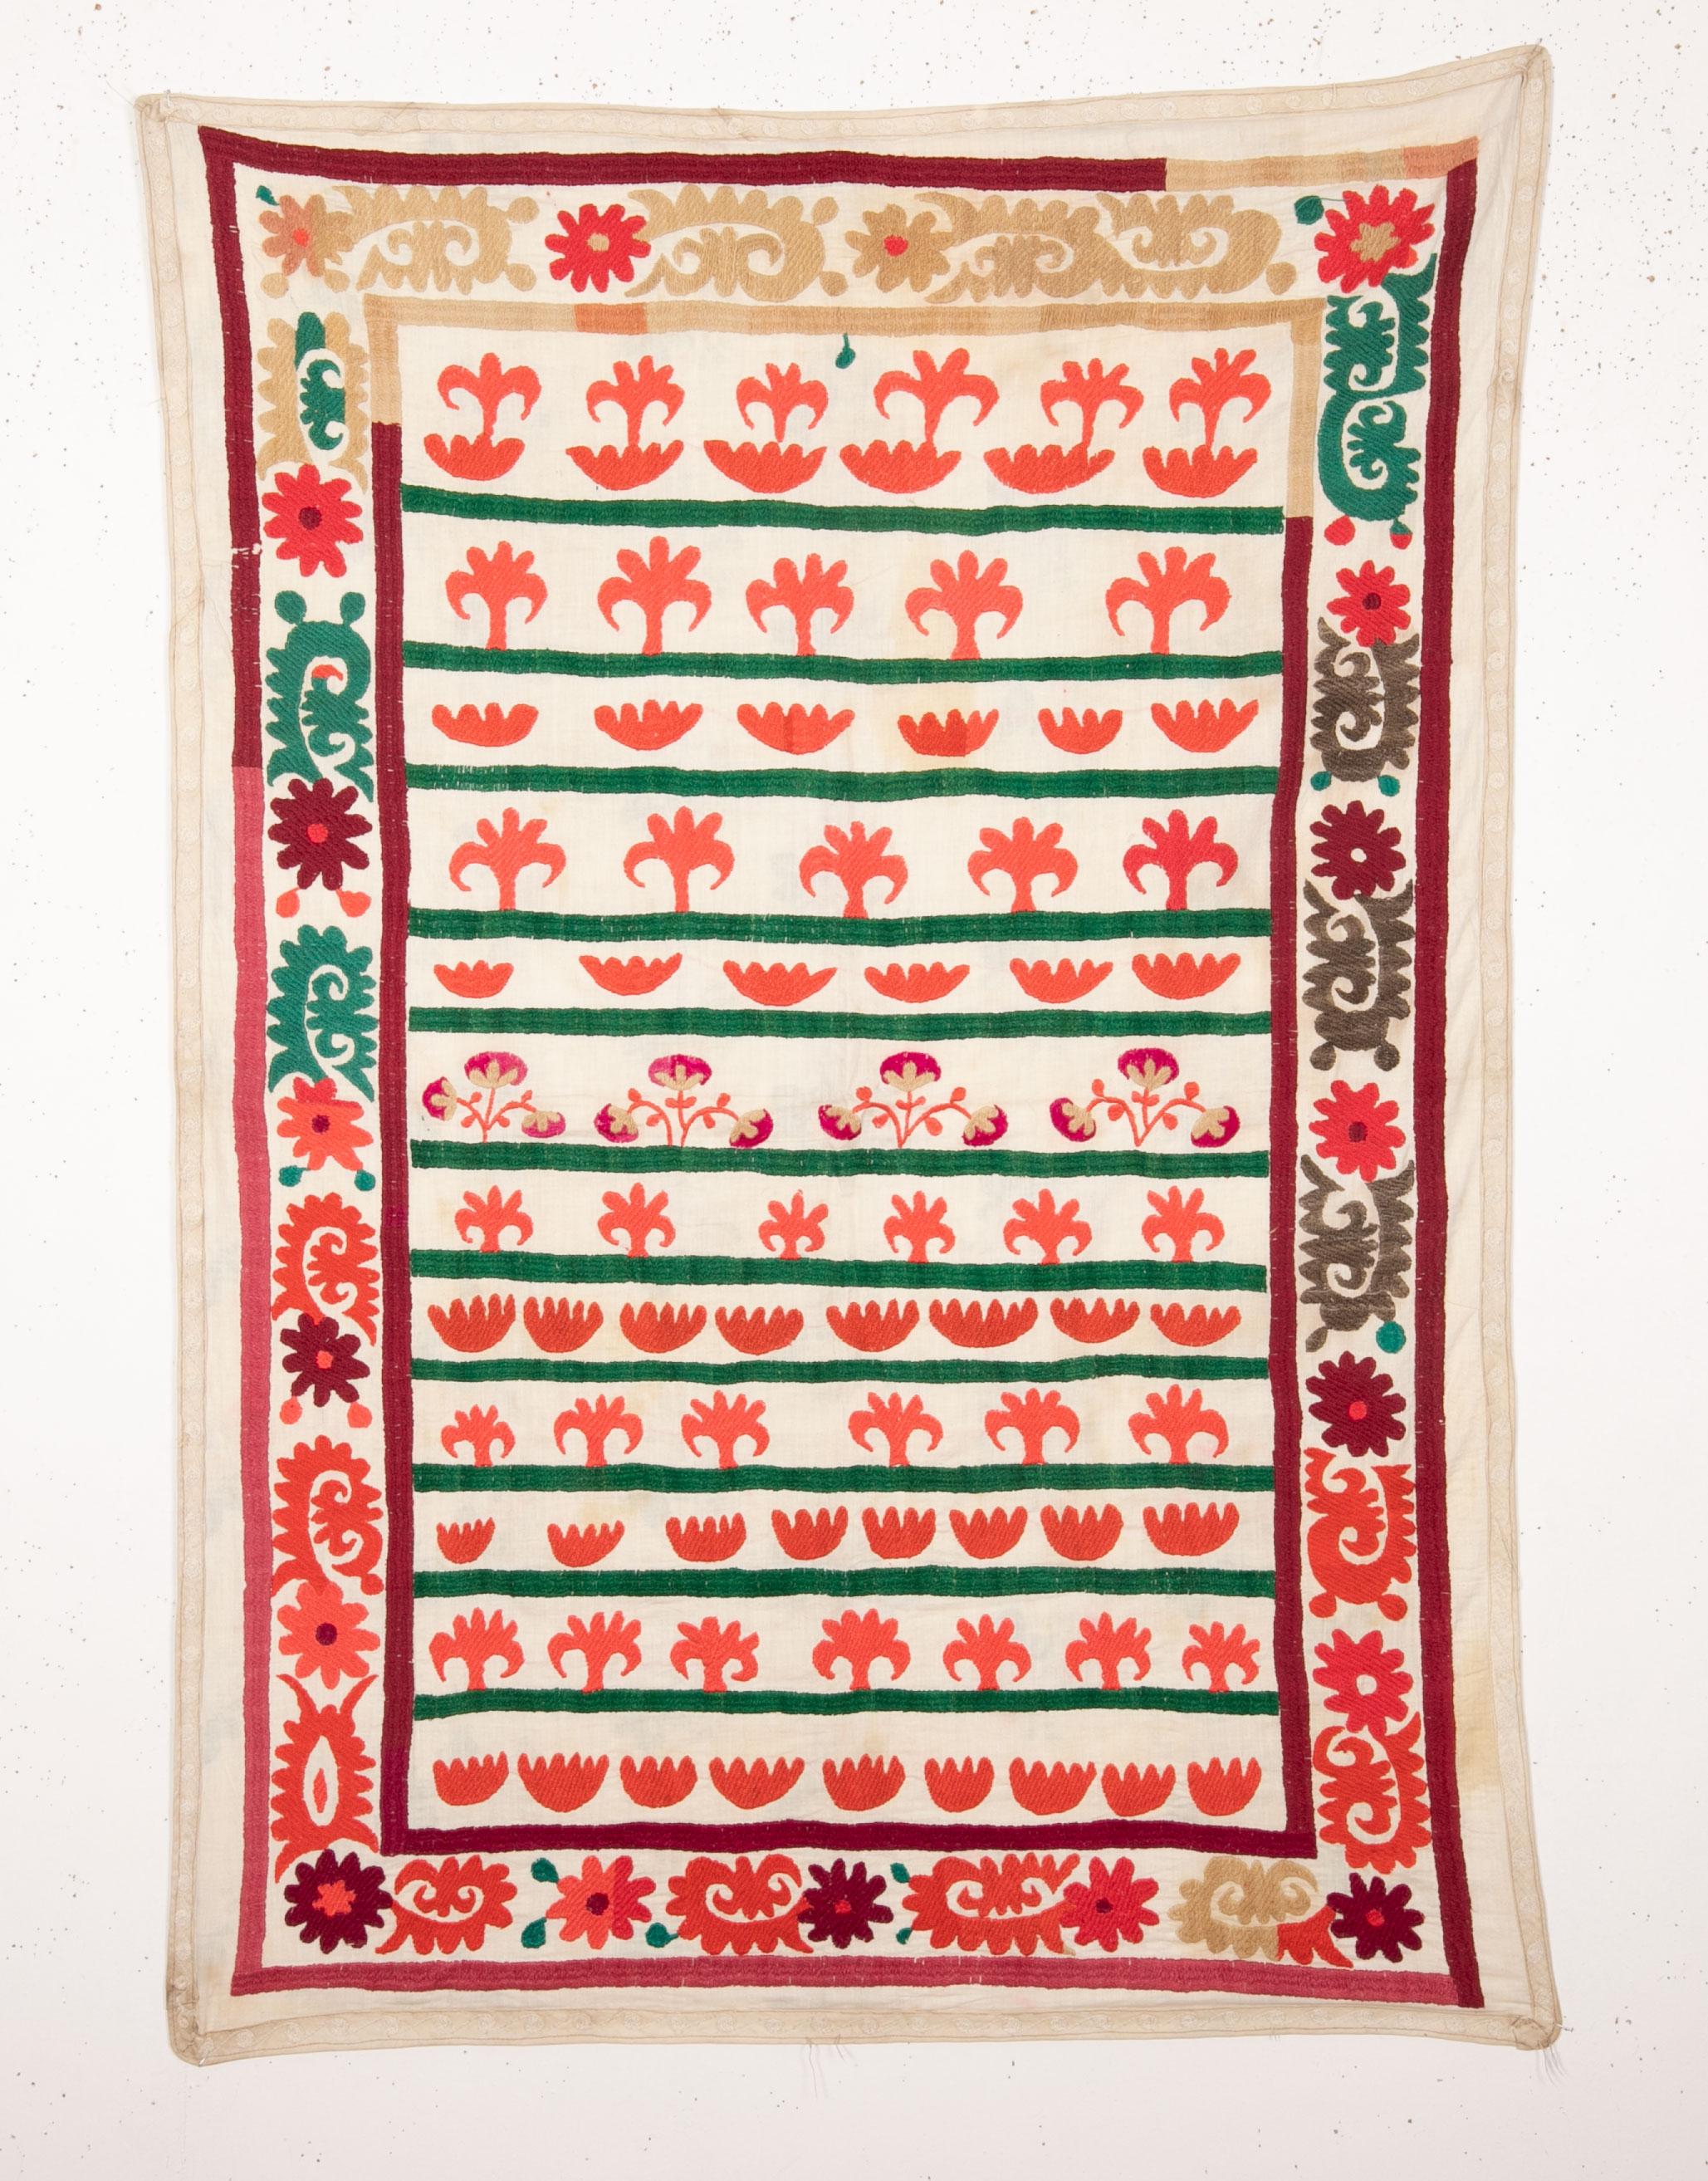 A small suzani used as a wall decor piece from 1970s.